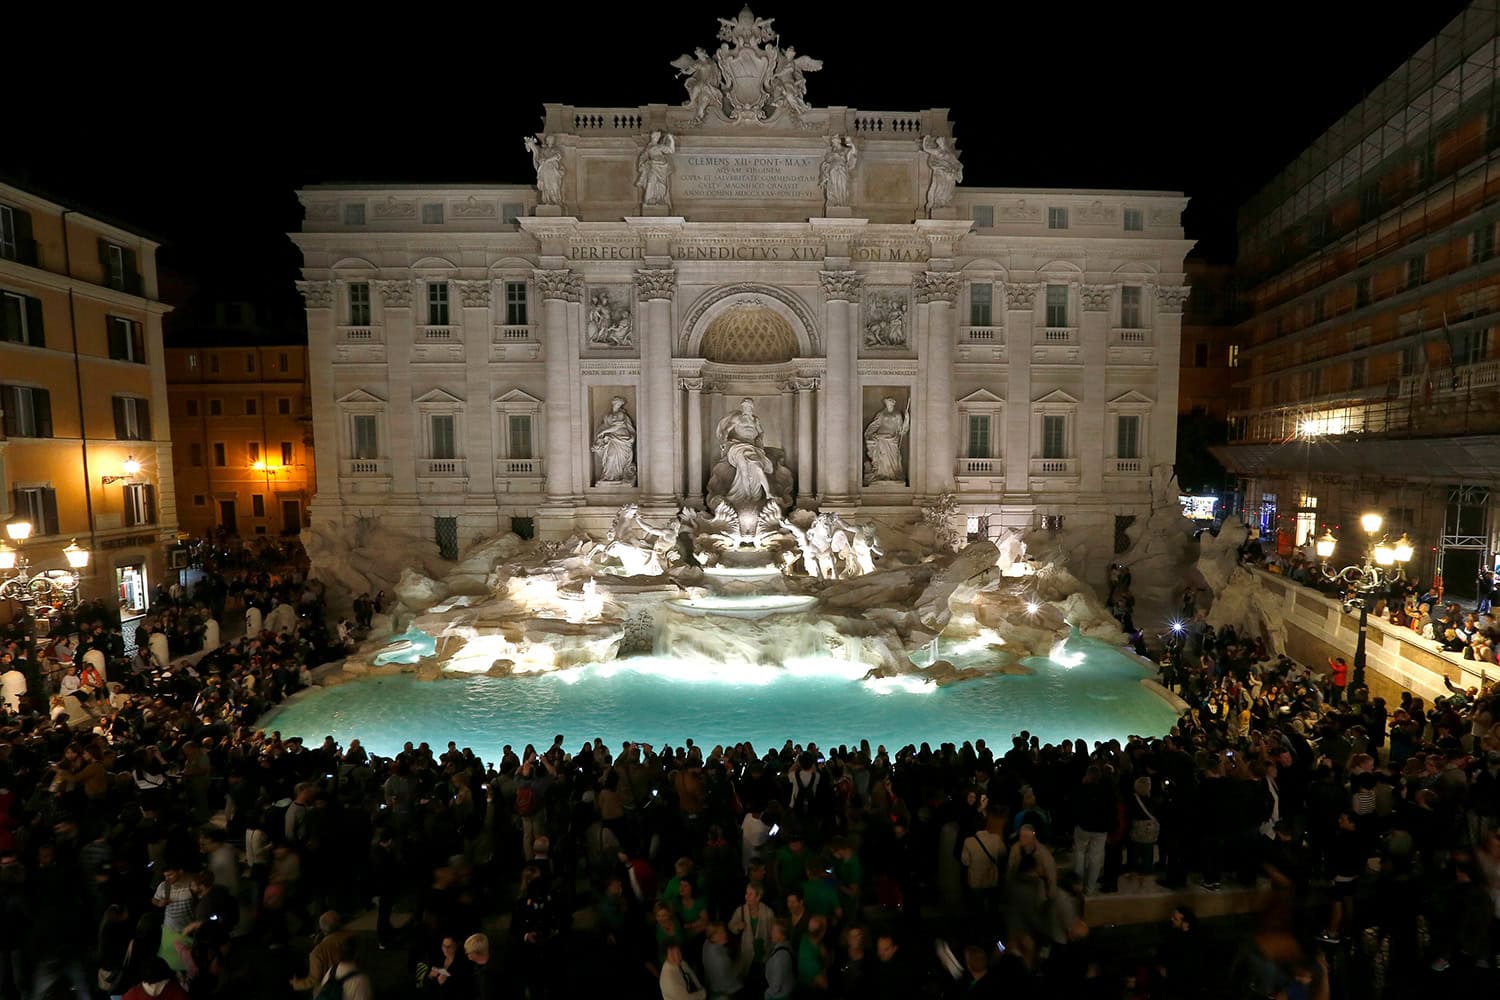 Thousands of people attend the inauguration ceremony at the Trevi Fountain